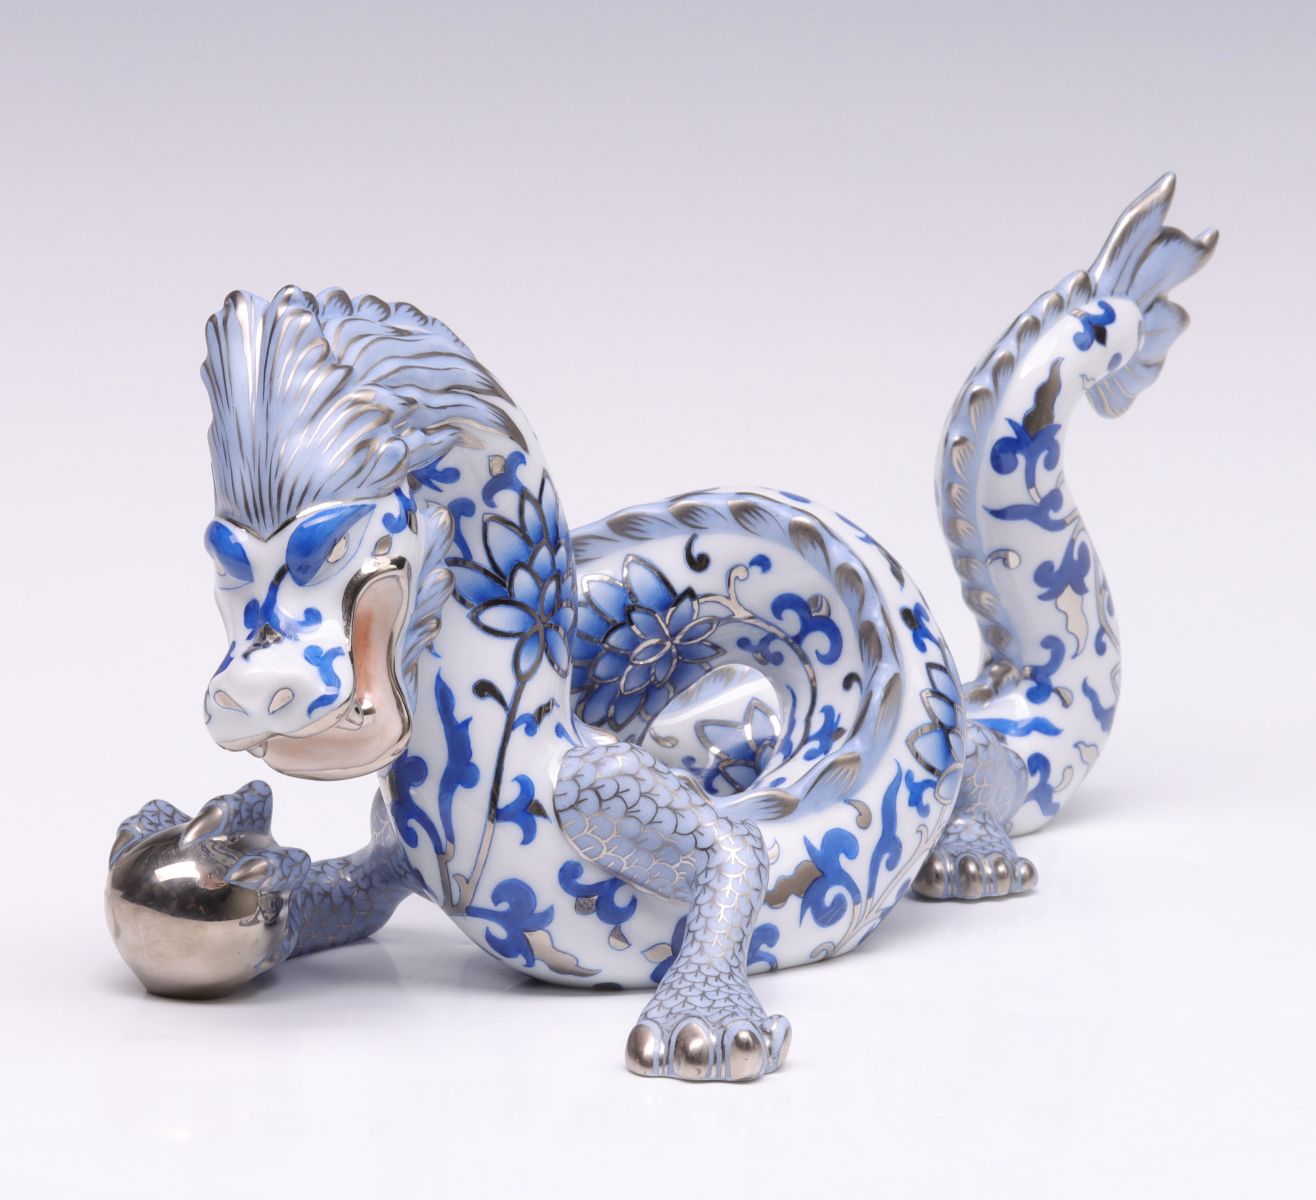 A LIMITED HEREND PLATINUM RESERVE MING DYNASTY DRAGON